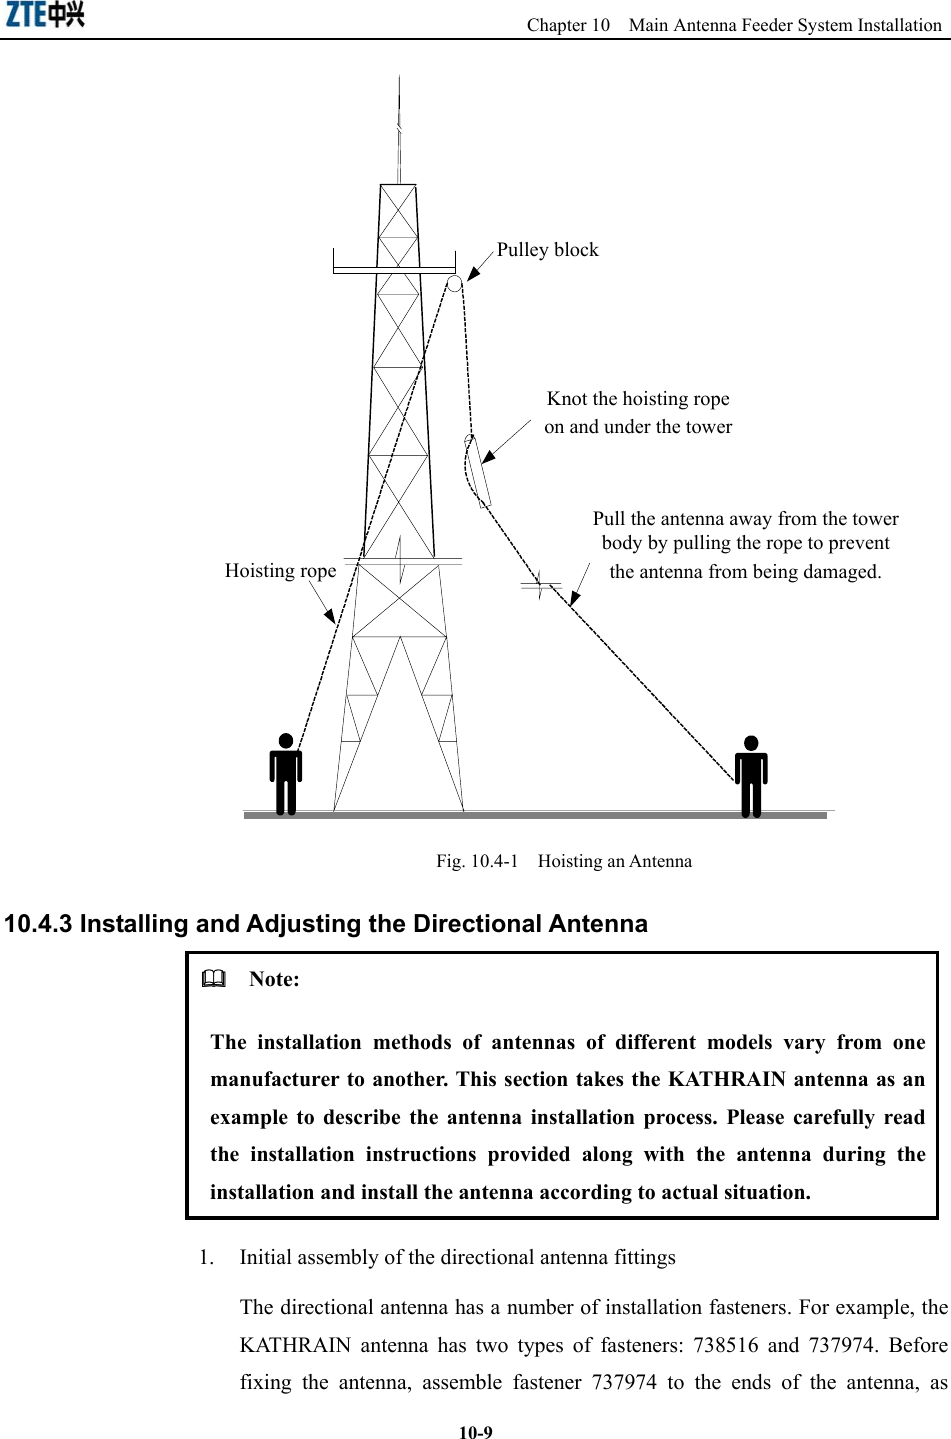                                                Chapter 10  Main Antenna Feeder System Installation  10-9Pulley blockHoisting ropeKnot the hoisting rope on and under the towerPull the antenna away from the tower body by pulling the rope to prevent the antenna from being damaged. Fig. 10.4-1  Hoisting an Antenna 10.4.3 Installing and Adjusting the Directional Antenna   Note: The installation methods of antennas of different models vary from one manufacturer to another. This section takes the KATHRAIN antenna as an example to describe the antenna installation process. Please carefully read the installation instructions provided along with the antenna during the installation and install the antenna according to actual situation. 1.  Initial assembly of the directional antenna fittings The directional antenna has a number of installation fasteners. For example, the KATHRAIN antenna has two types of fasteners: 738516 and 737974. Before fixing the antenna, assemble fastener 737974 to the ends of the antenna, as 